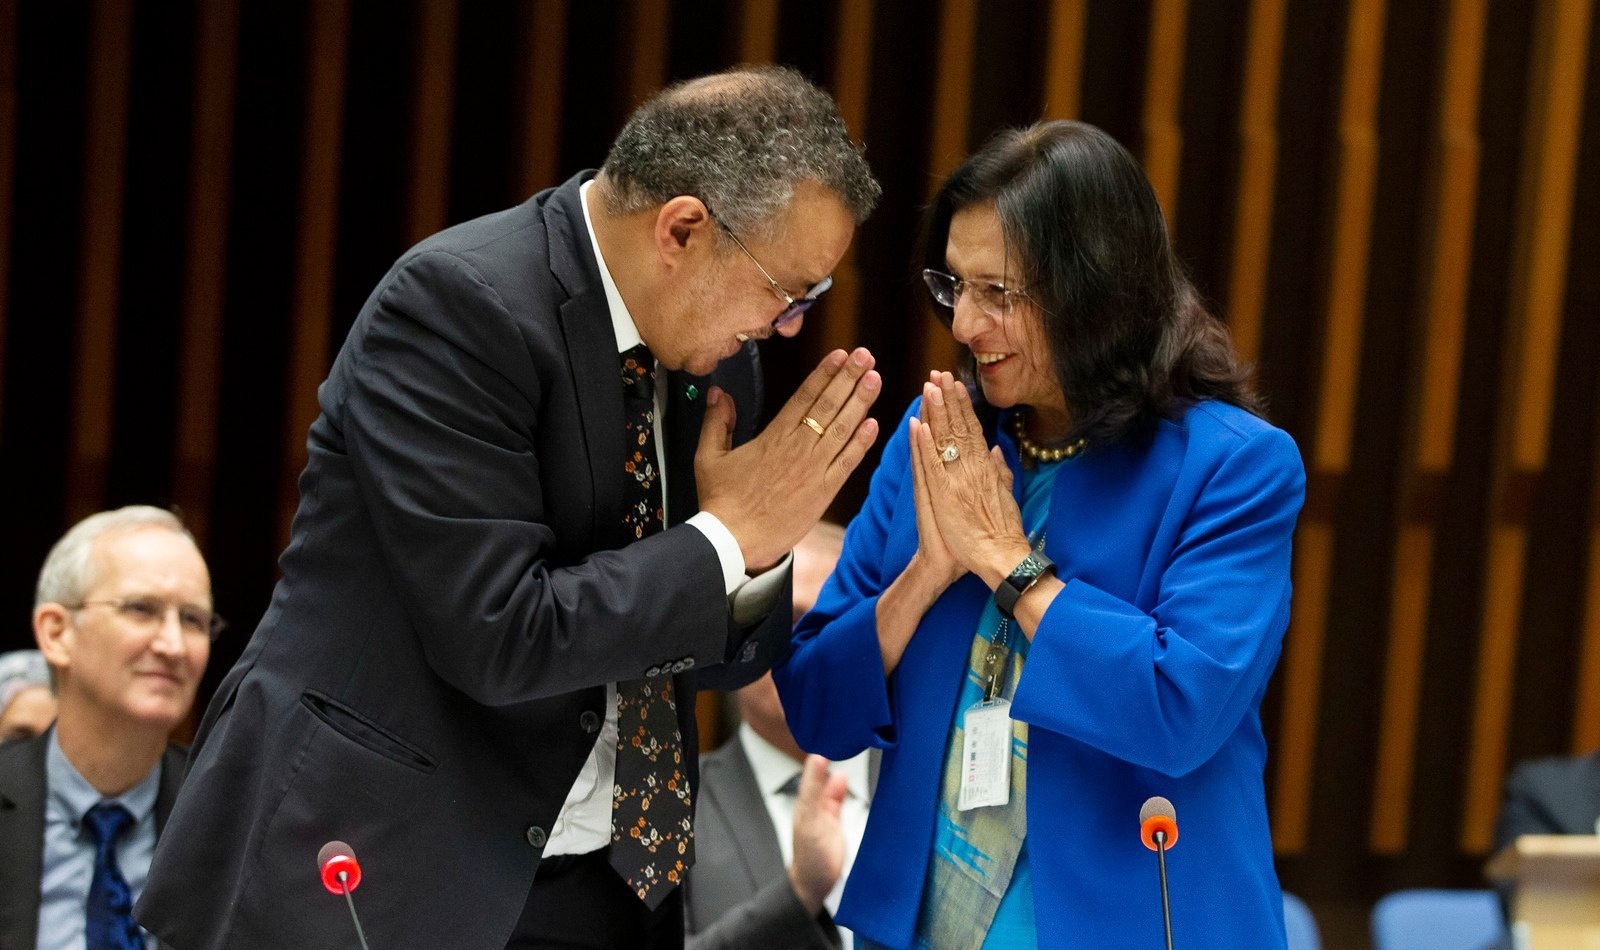 WHO Director-General and Regional Director for SEARO greet each other by joining their palms and bow their heads.